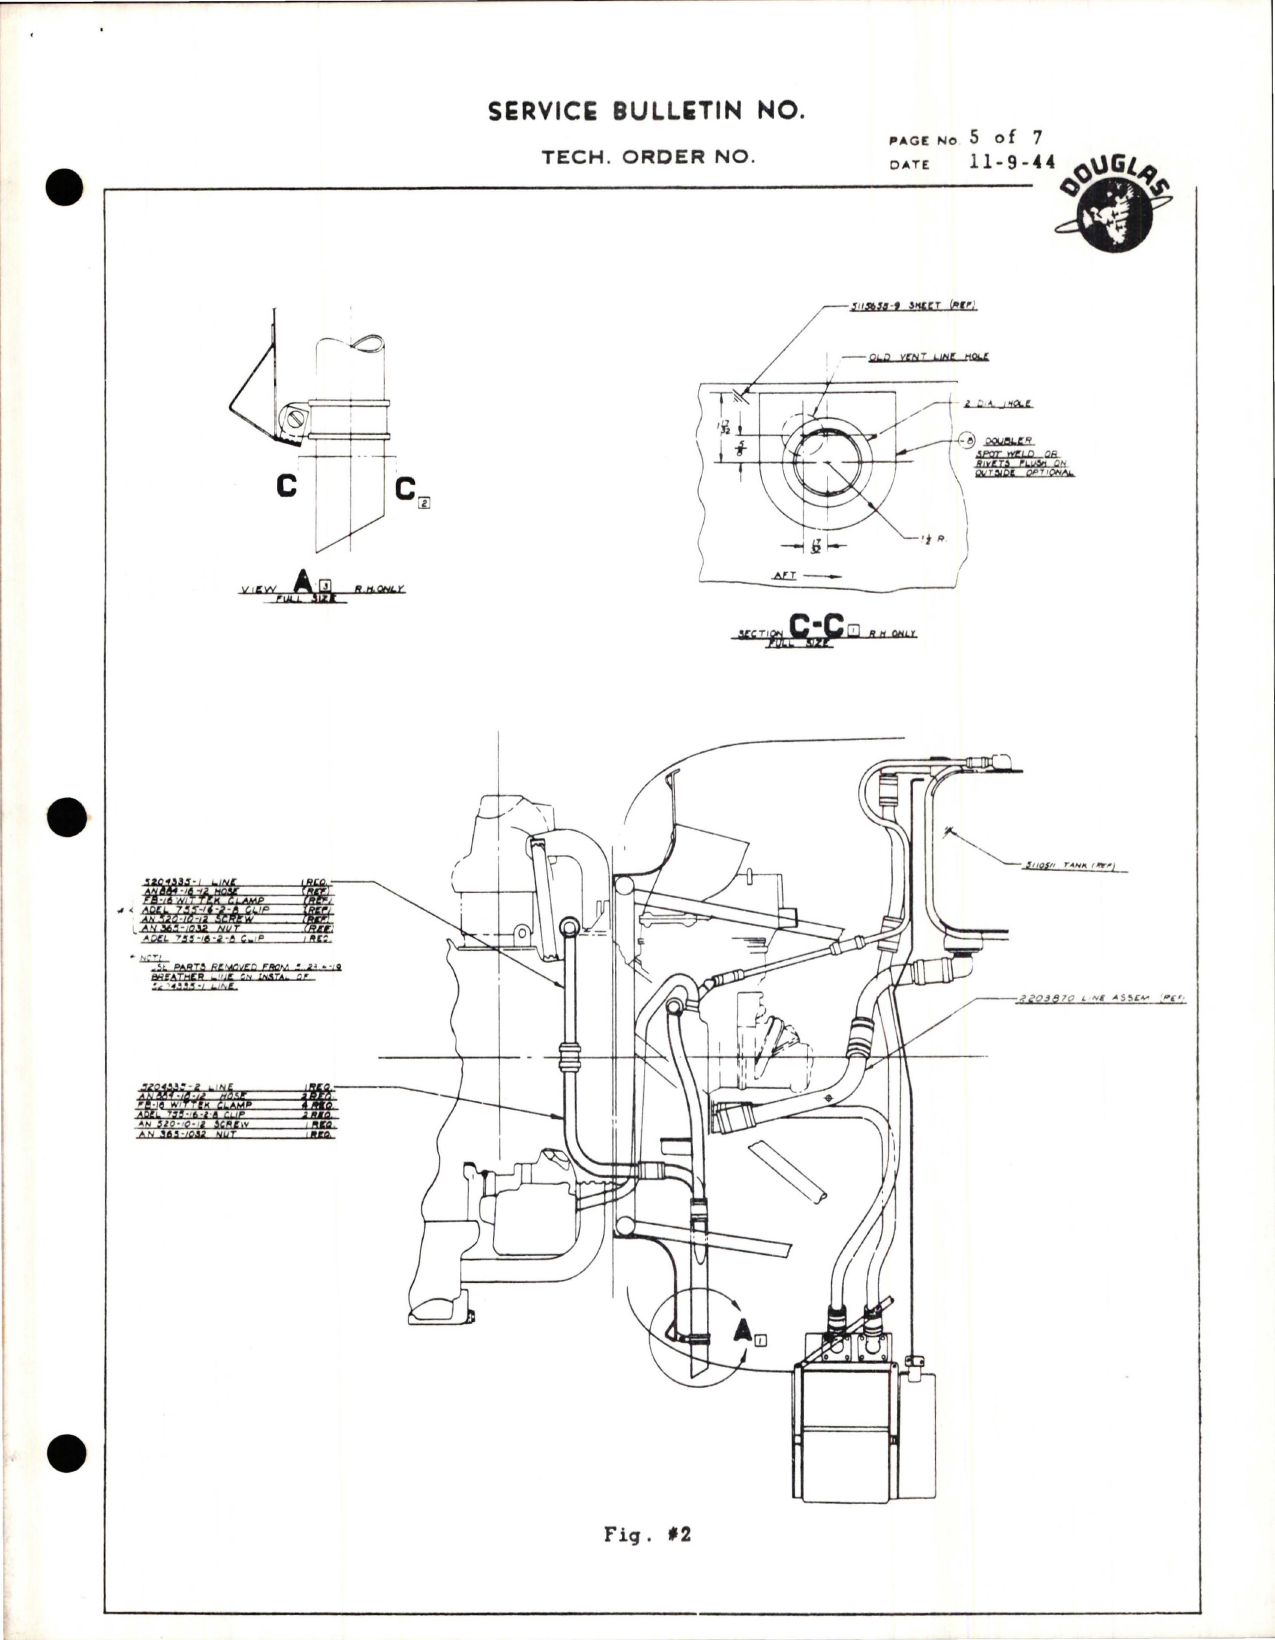 Sample page 5 from AirCorps Library document: Installation of Oil Venting System for 30% Dilution (Winterization)